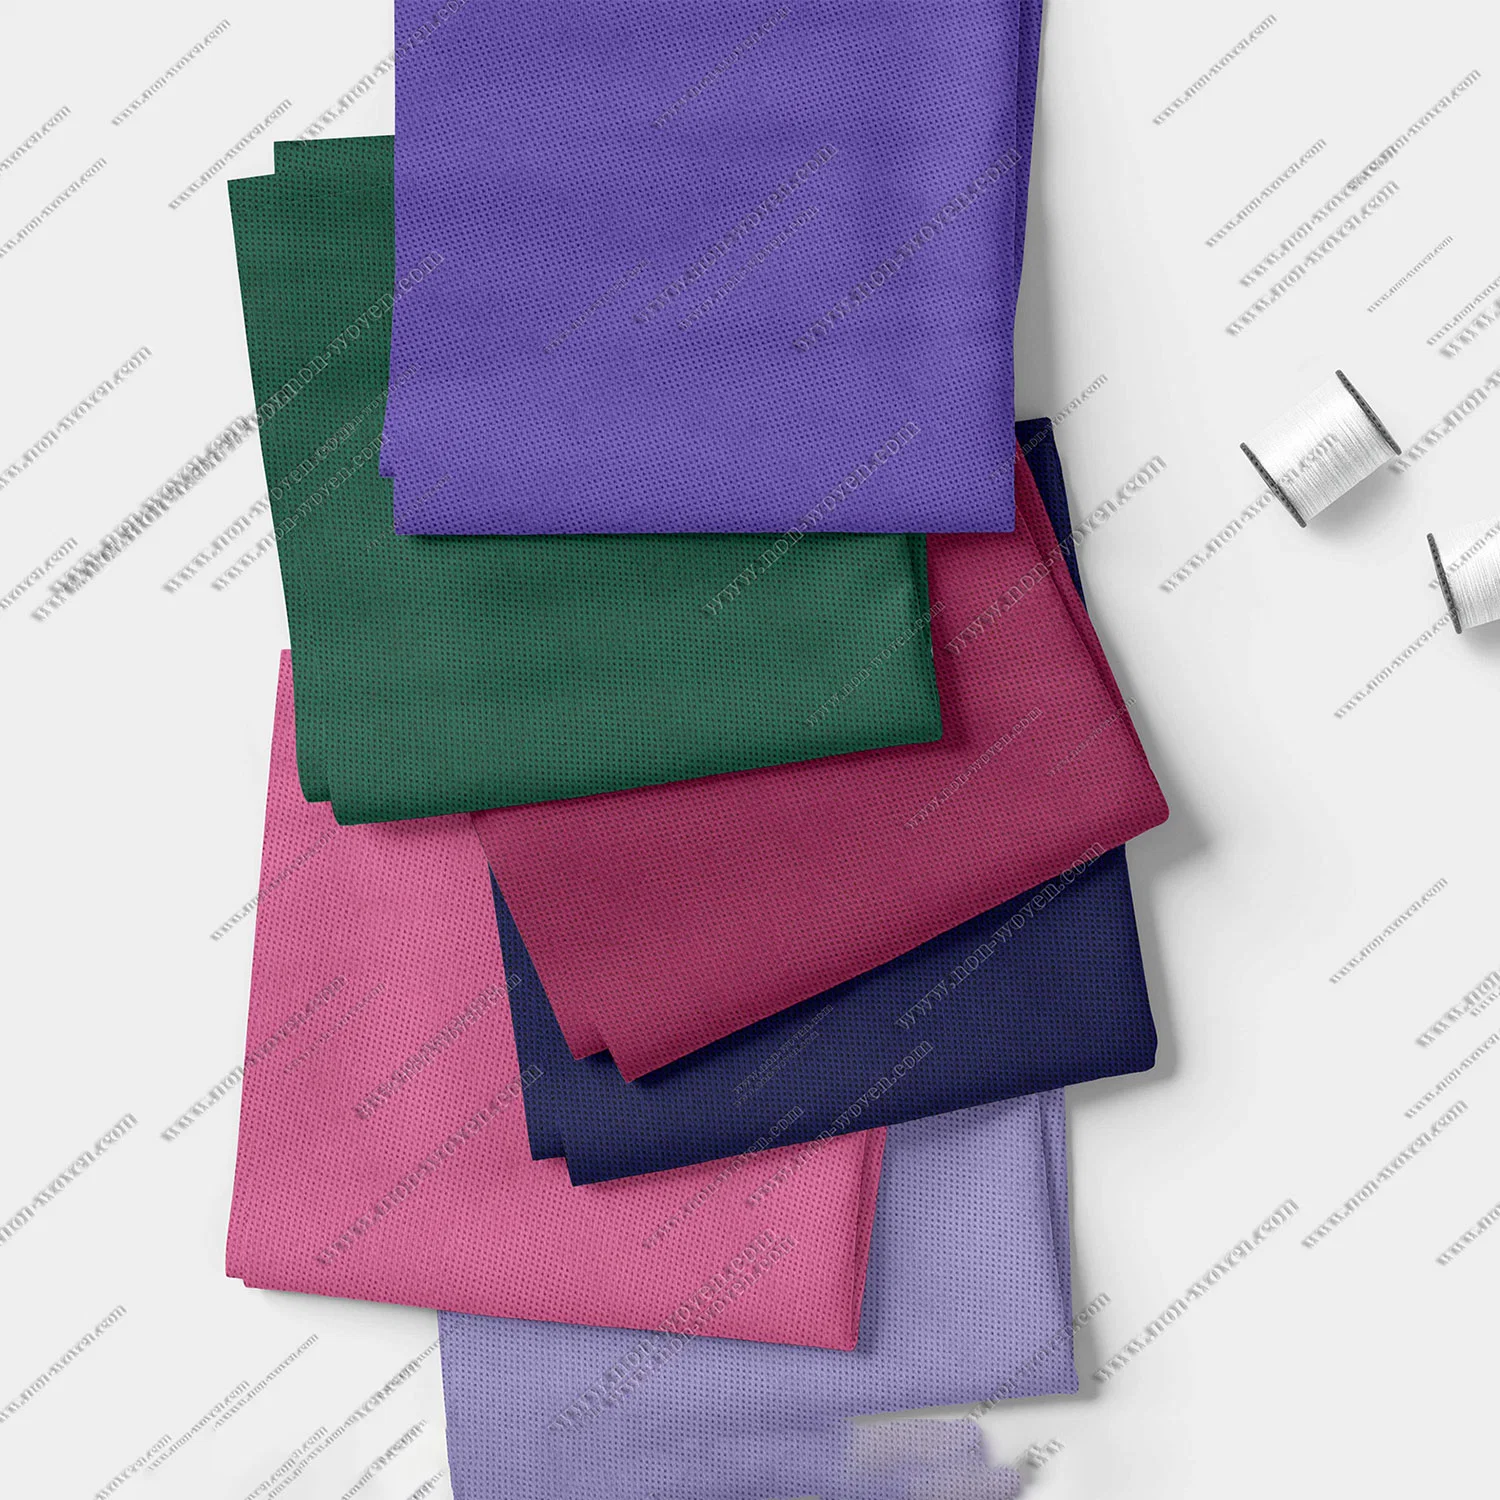 Fabric Wholesale/Supplierr Supply Biodegradable Non-Woven Fabric Material